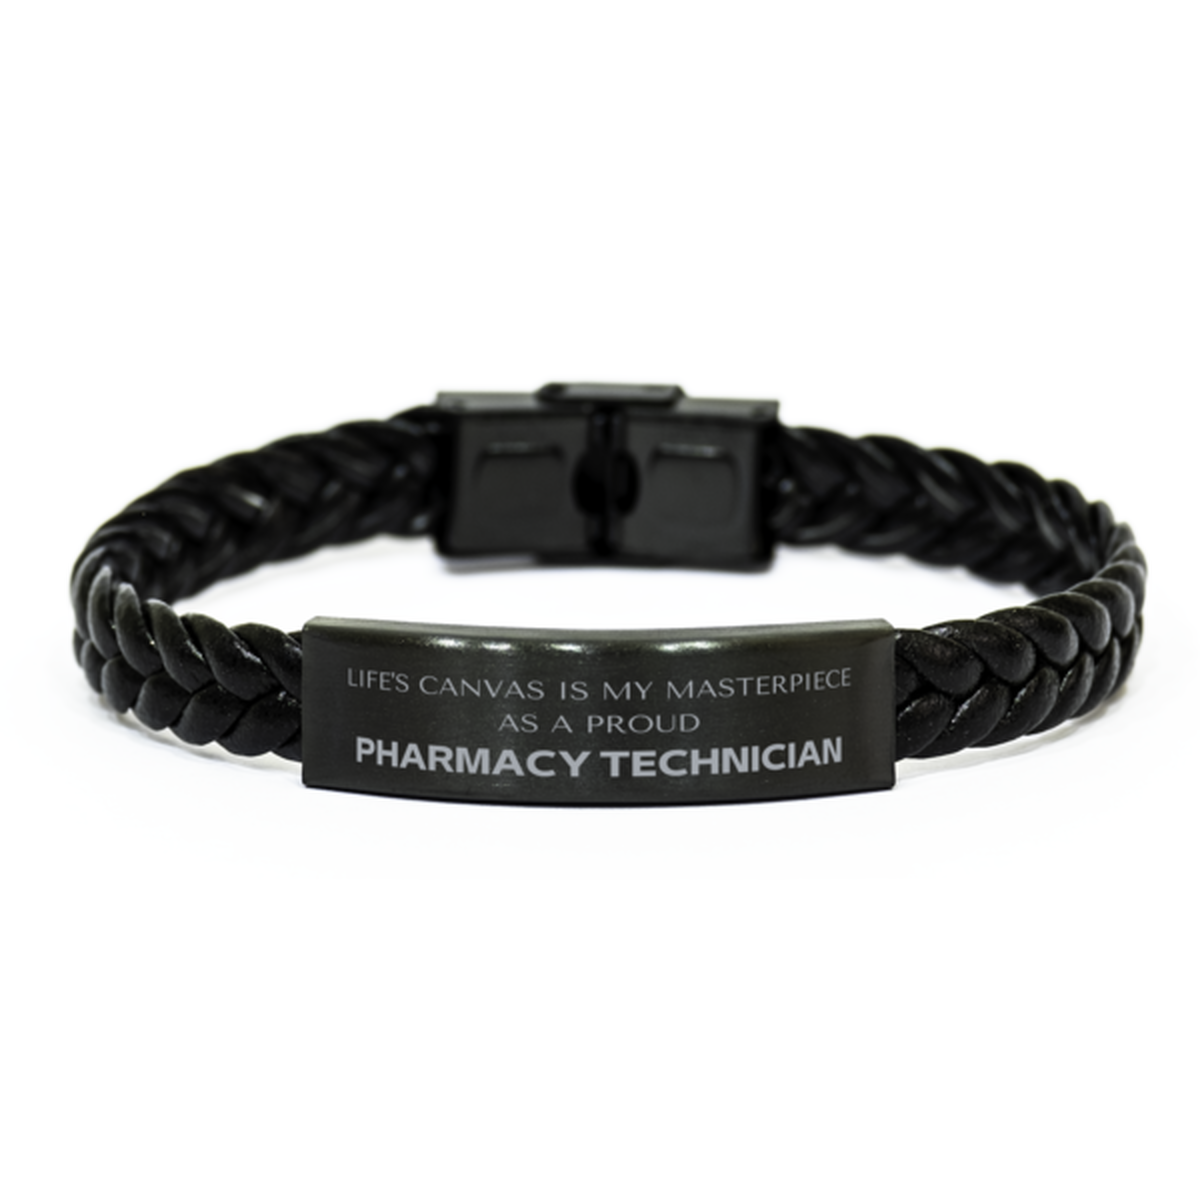 Proud Pharmacy Technician Gifts, Life's canvas is my masterpiece, Epic Birthday Christmas Unique Braided Leather Bracelet For Pharmacy Technician, Coworkers, Men, Women, Friends